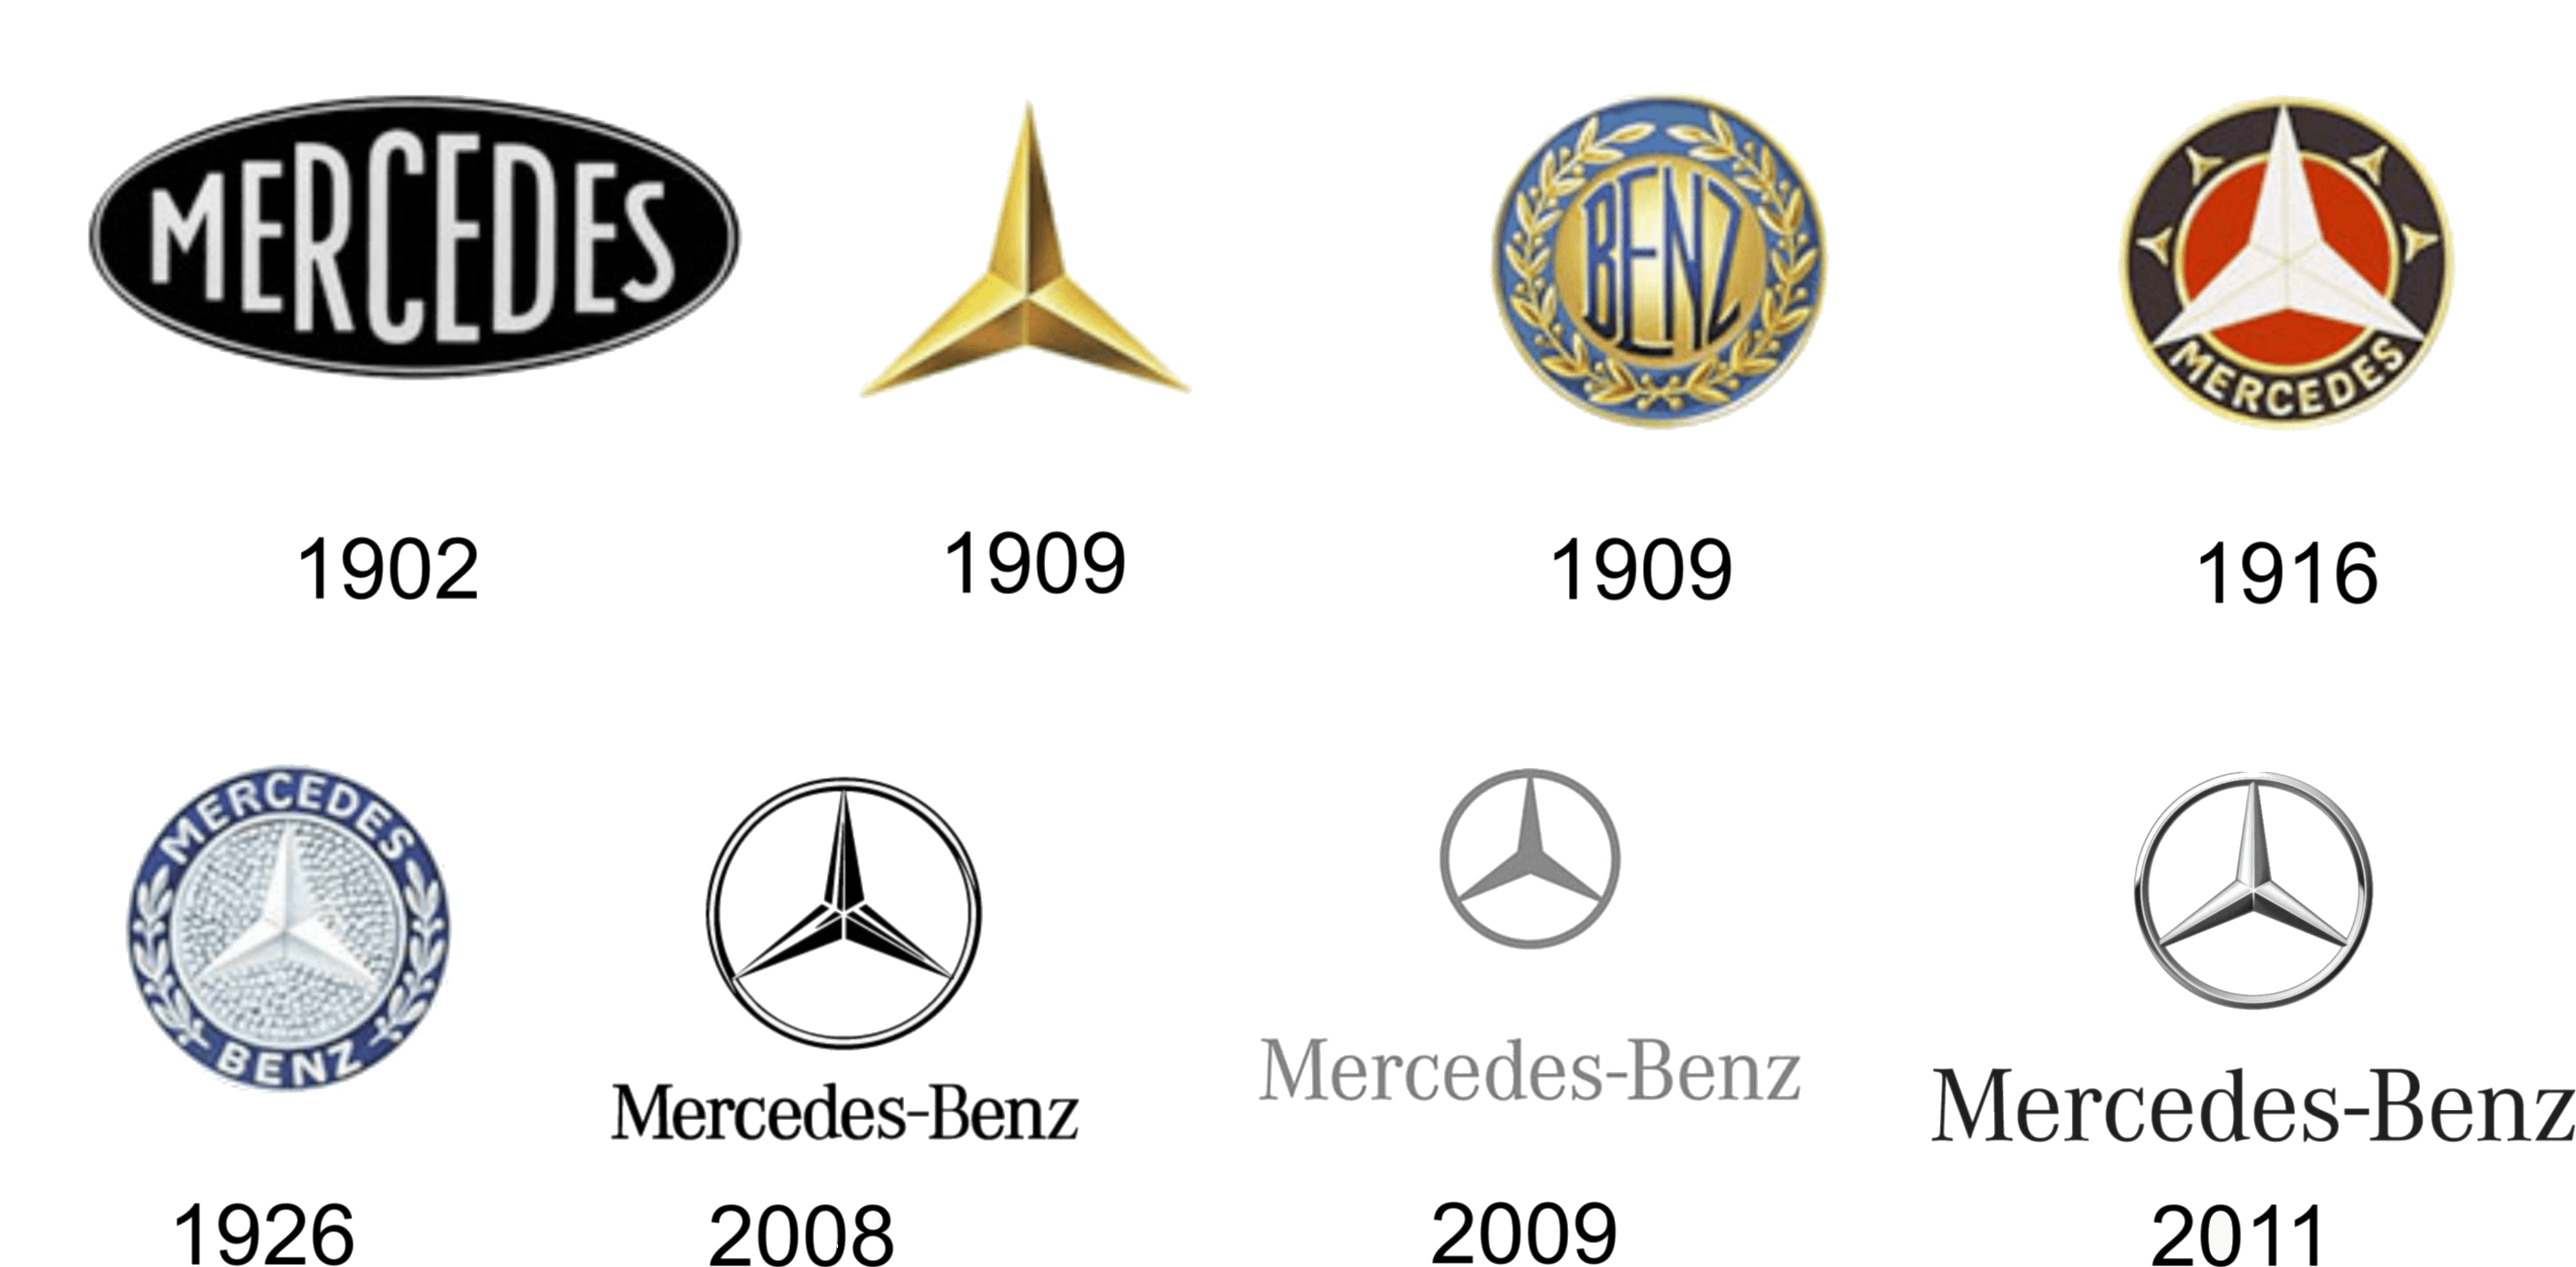 Mercedes-Benz Logo - Mercedes Logo, Mercedes Benz Car Symbol Meaning And History. Car